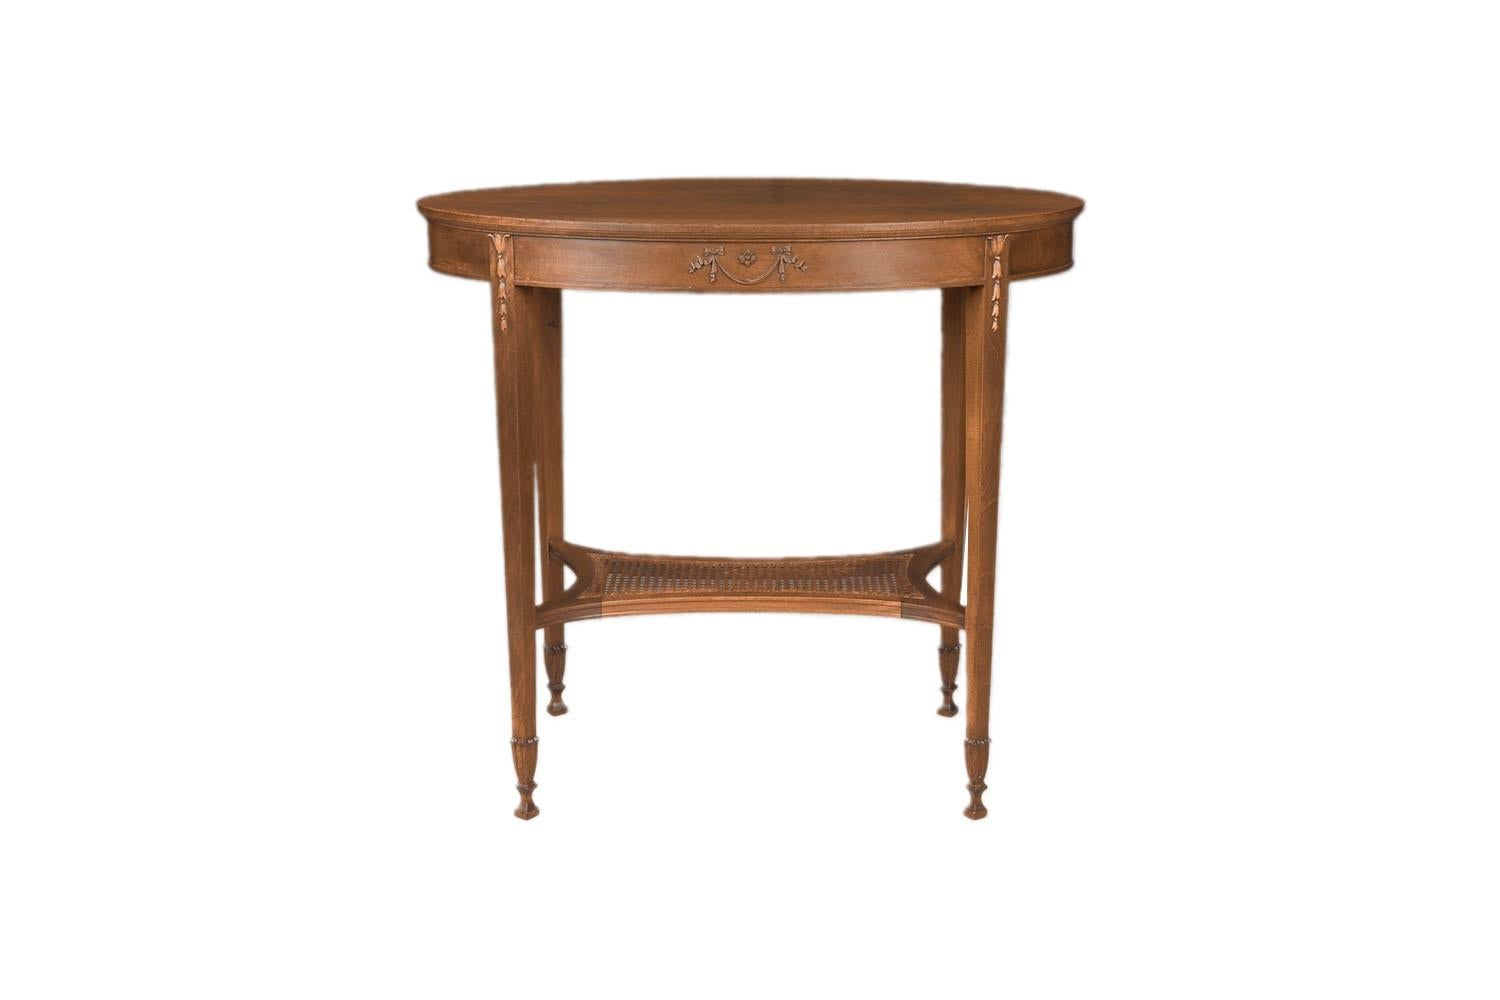 Antique English Hepplewhite Carved Bellflower Mahogany Caned Oval Side Table For Sale 2